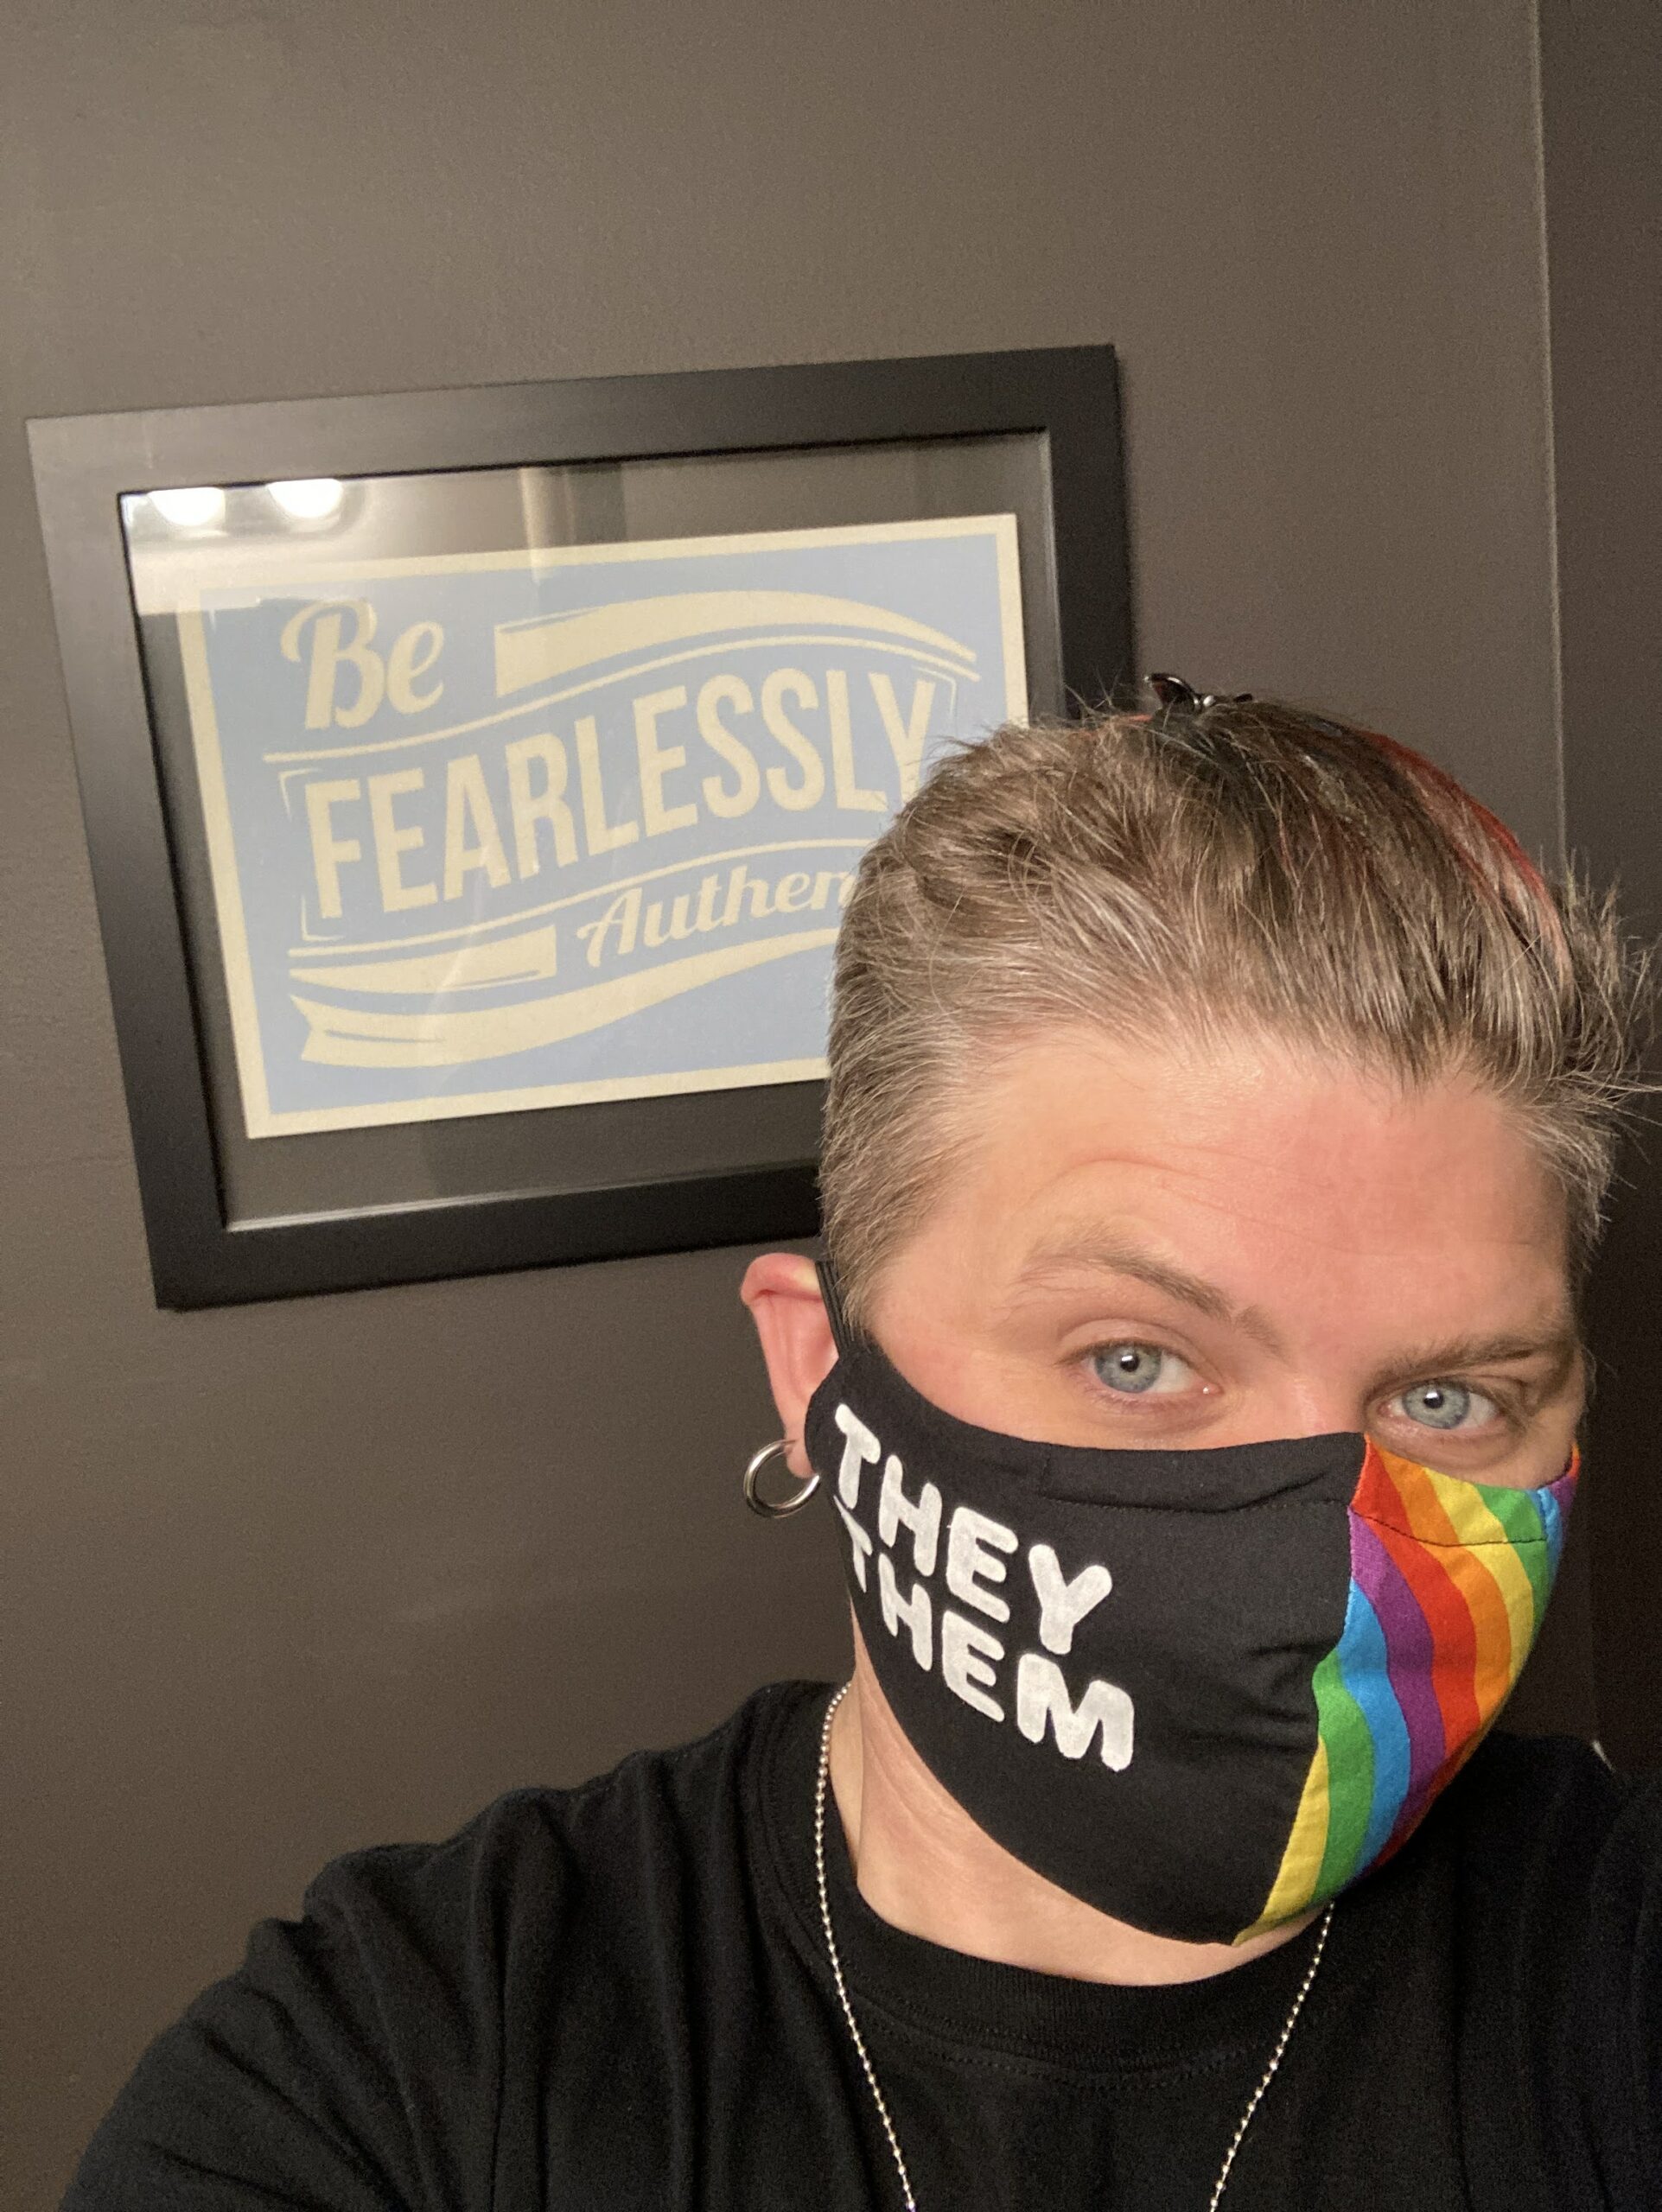 Photograph of Frances wearing a rainbow face mask that reads "they  them" in front of a framed photo that says "fearlessly authentic"